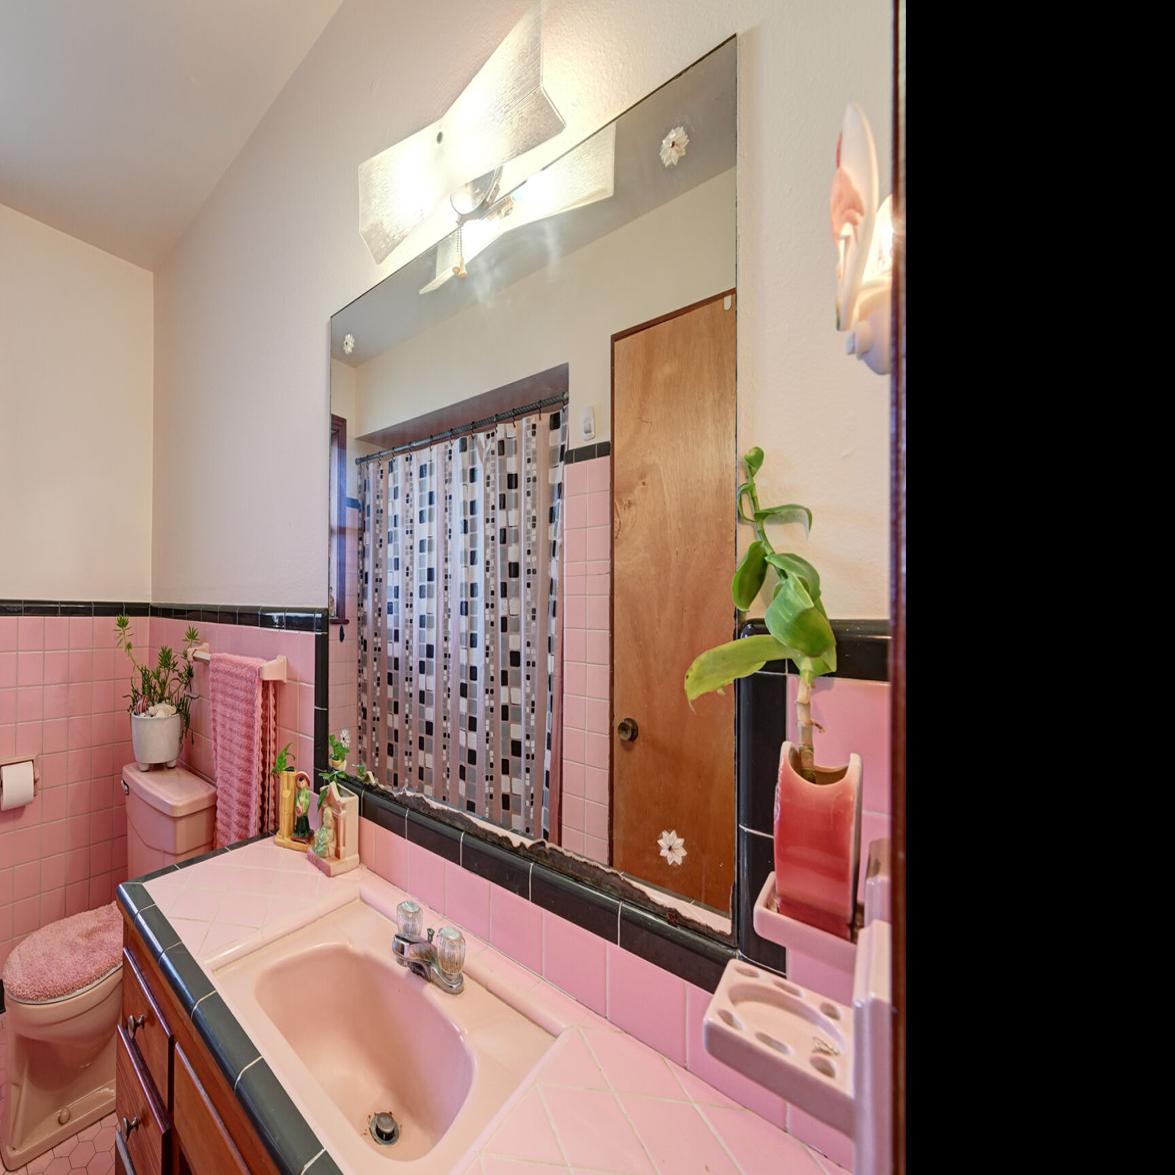 1950s Bathrooms and a Pink and Gray Kitchen: Friday Finds - Town